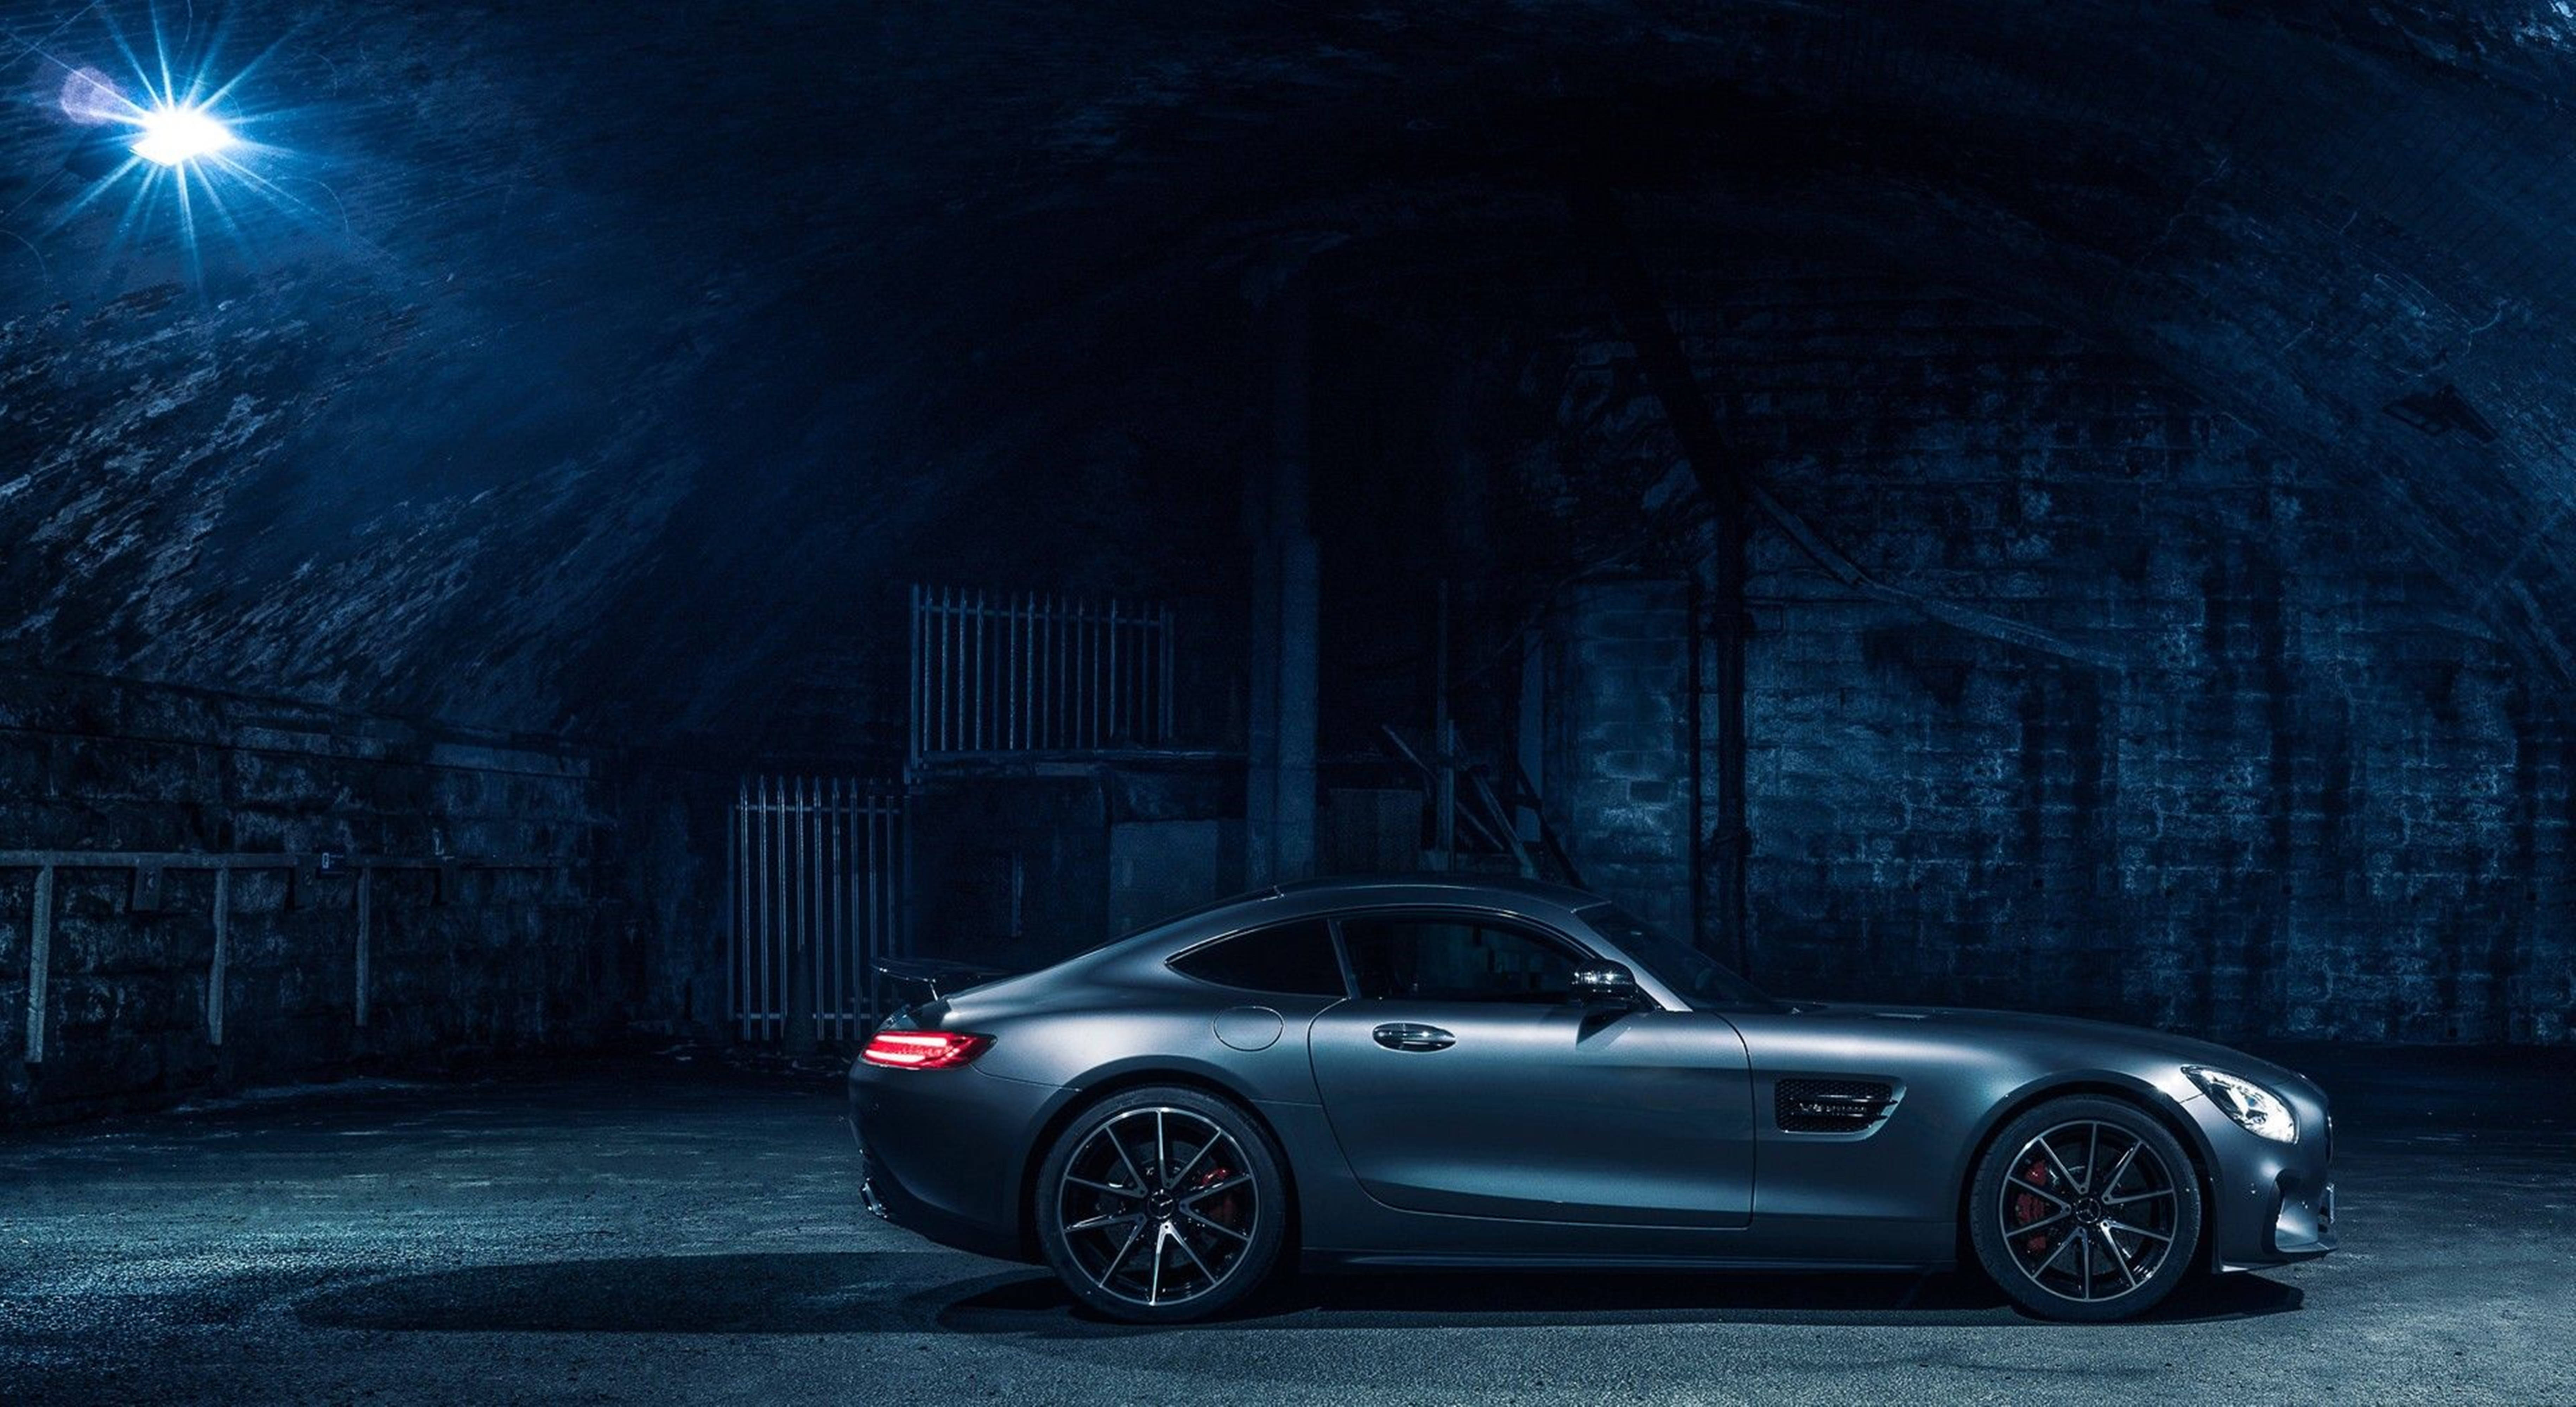 Sophisticated Mercedes Amg In 4k Resolution Displayed In An Abandoned Warehouse Setting Wallpaper